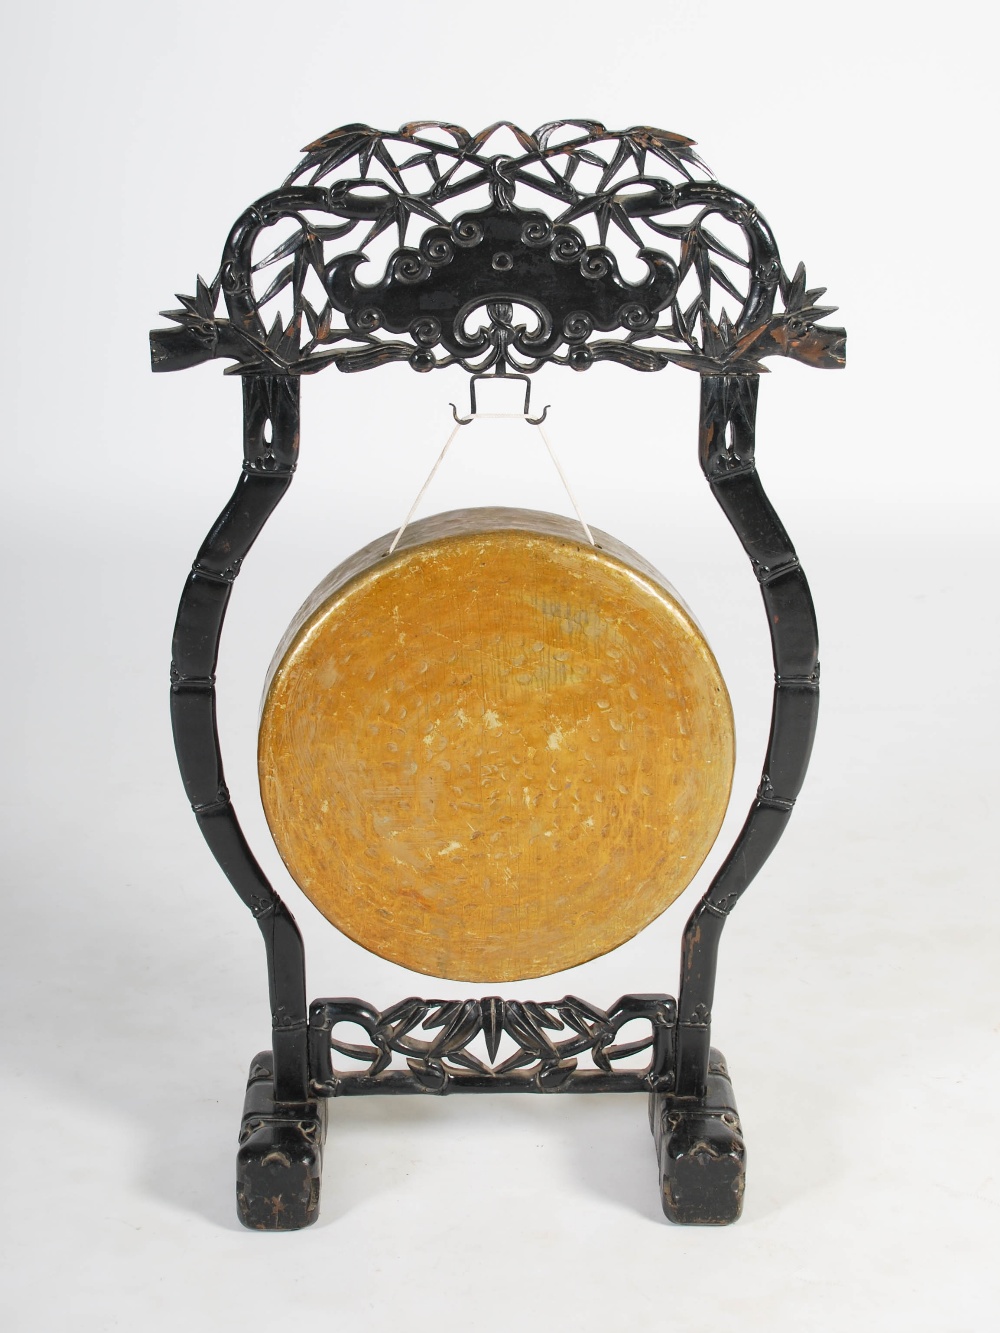 A Chinese gong and stand, late Qing Dynasty, the stand carved and pierced with bamboo stems